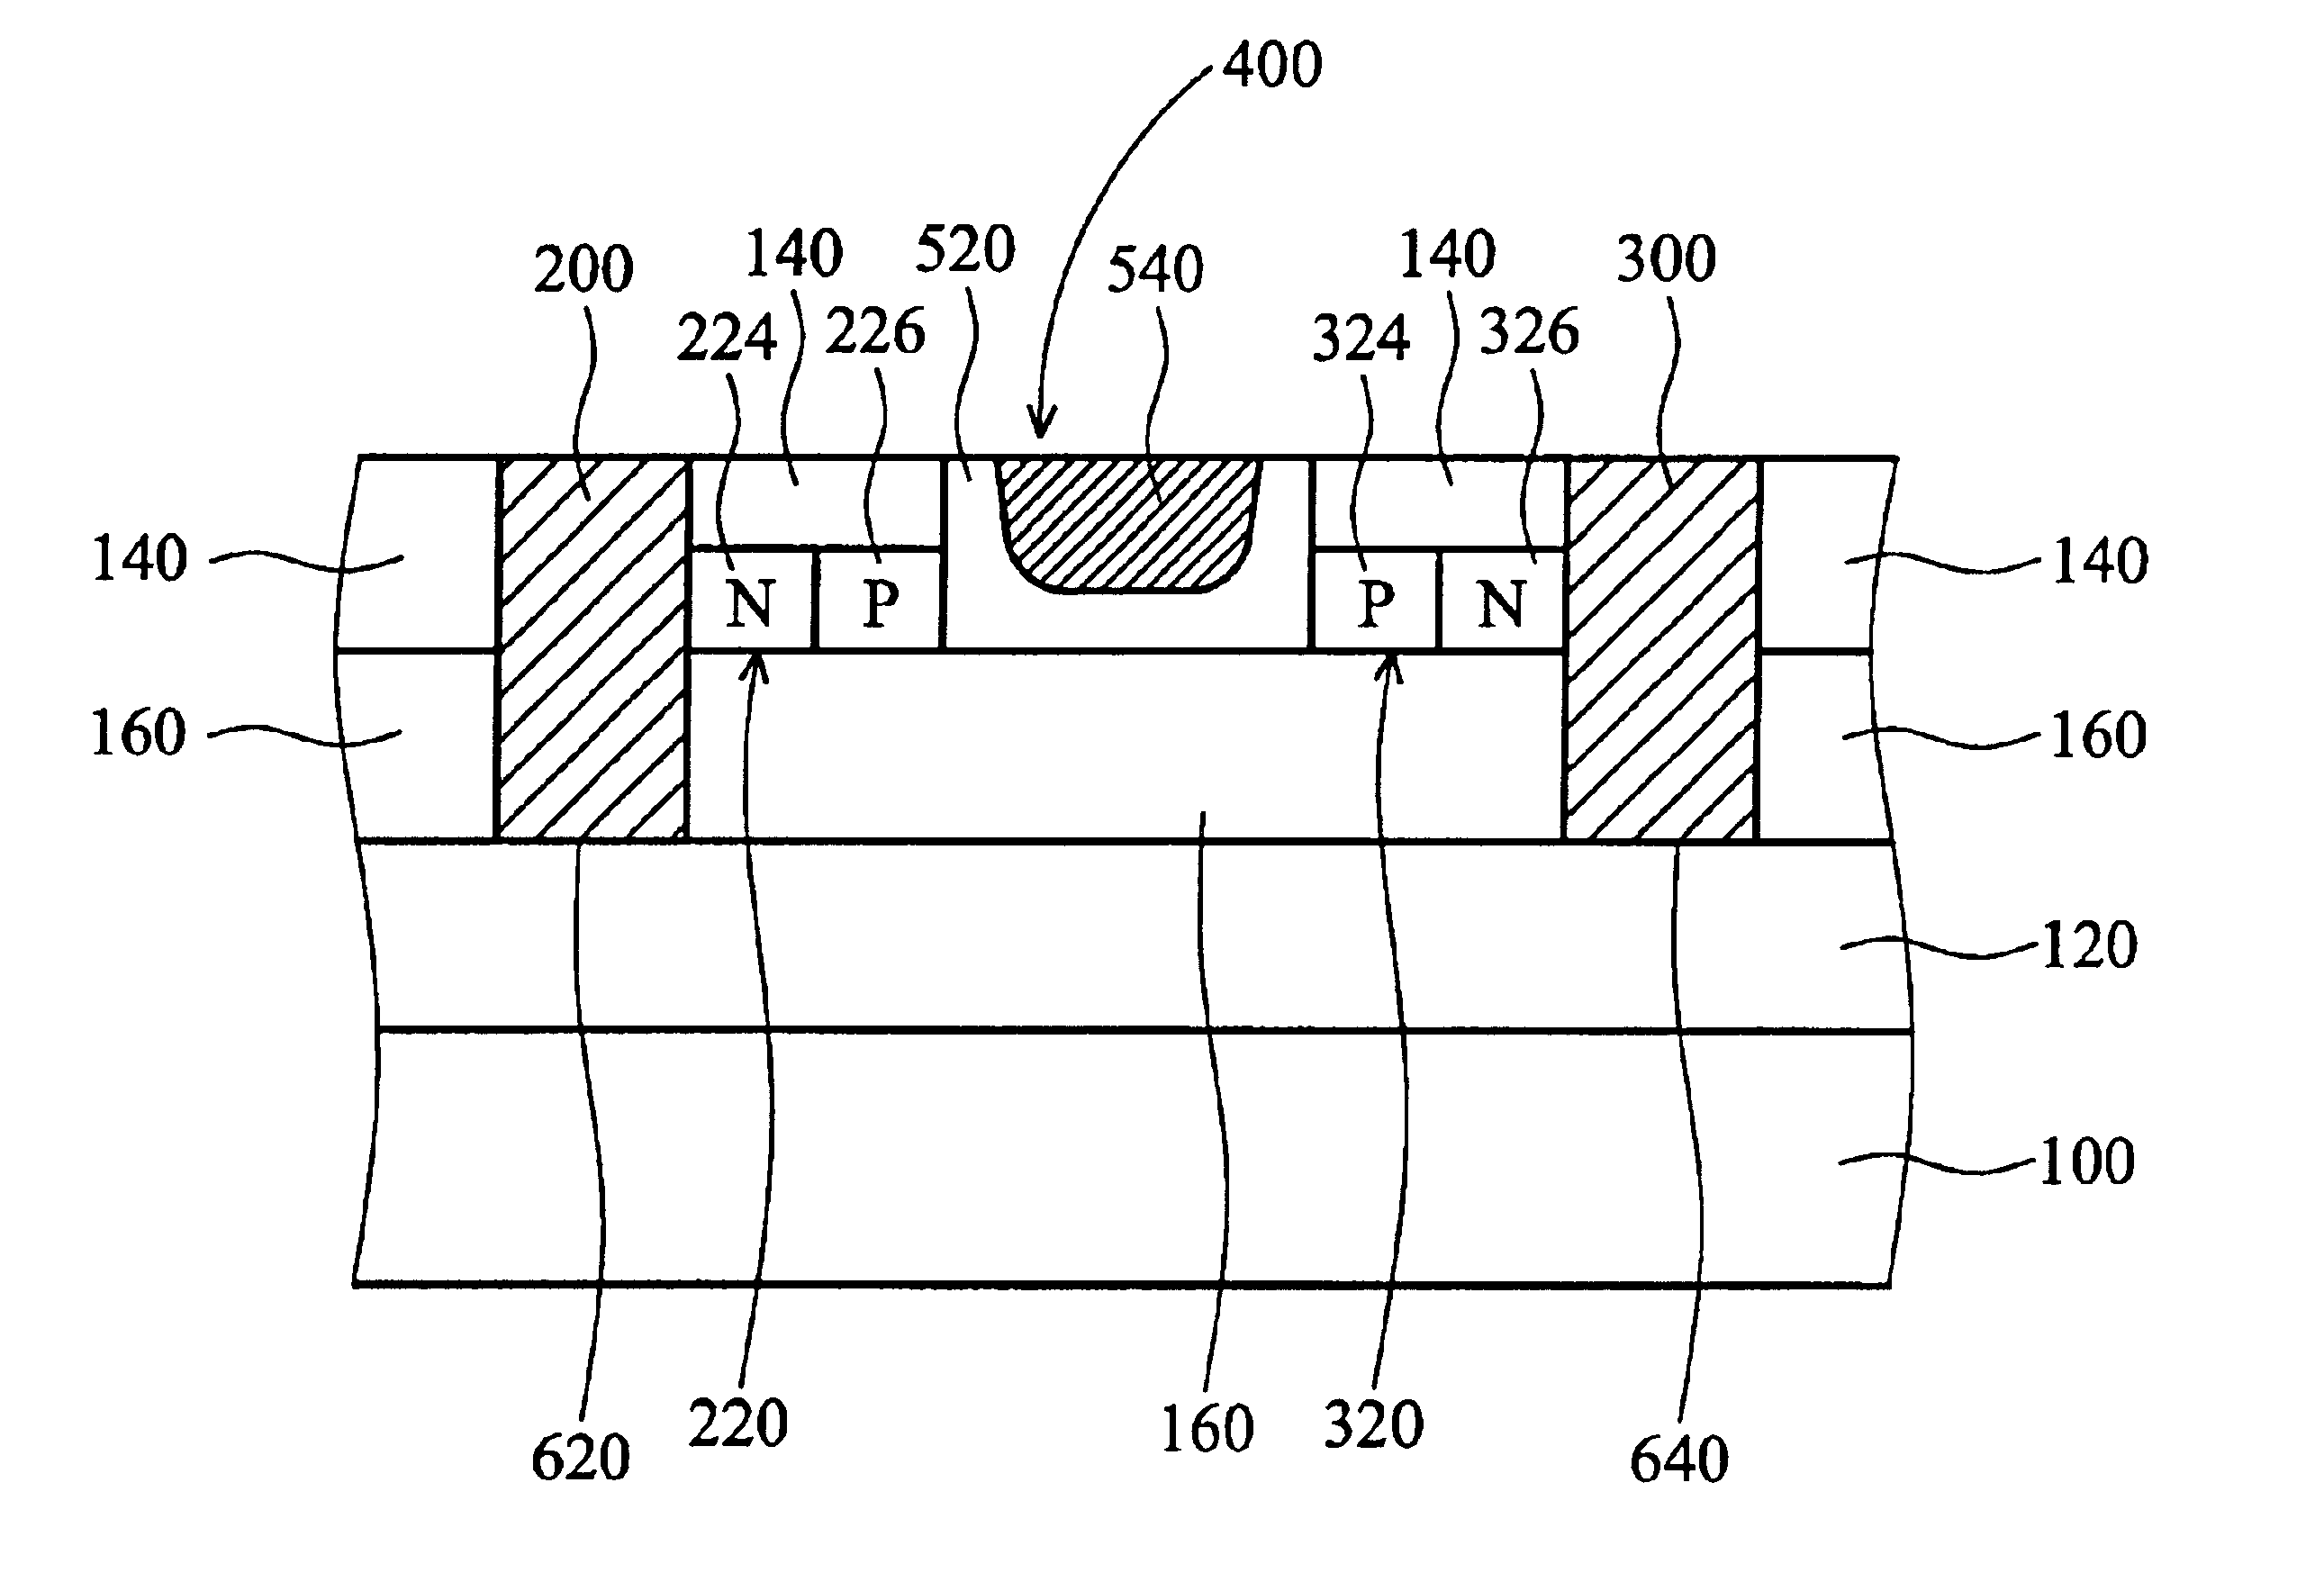 Chalcogenide memory device with multiple bits per cell